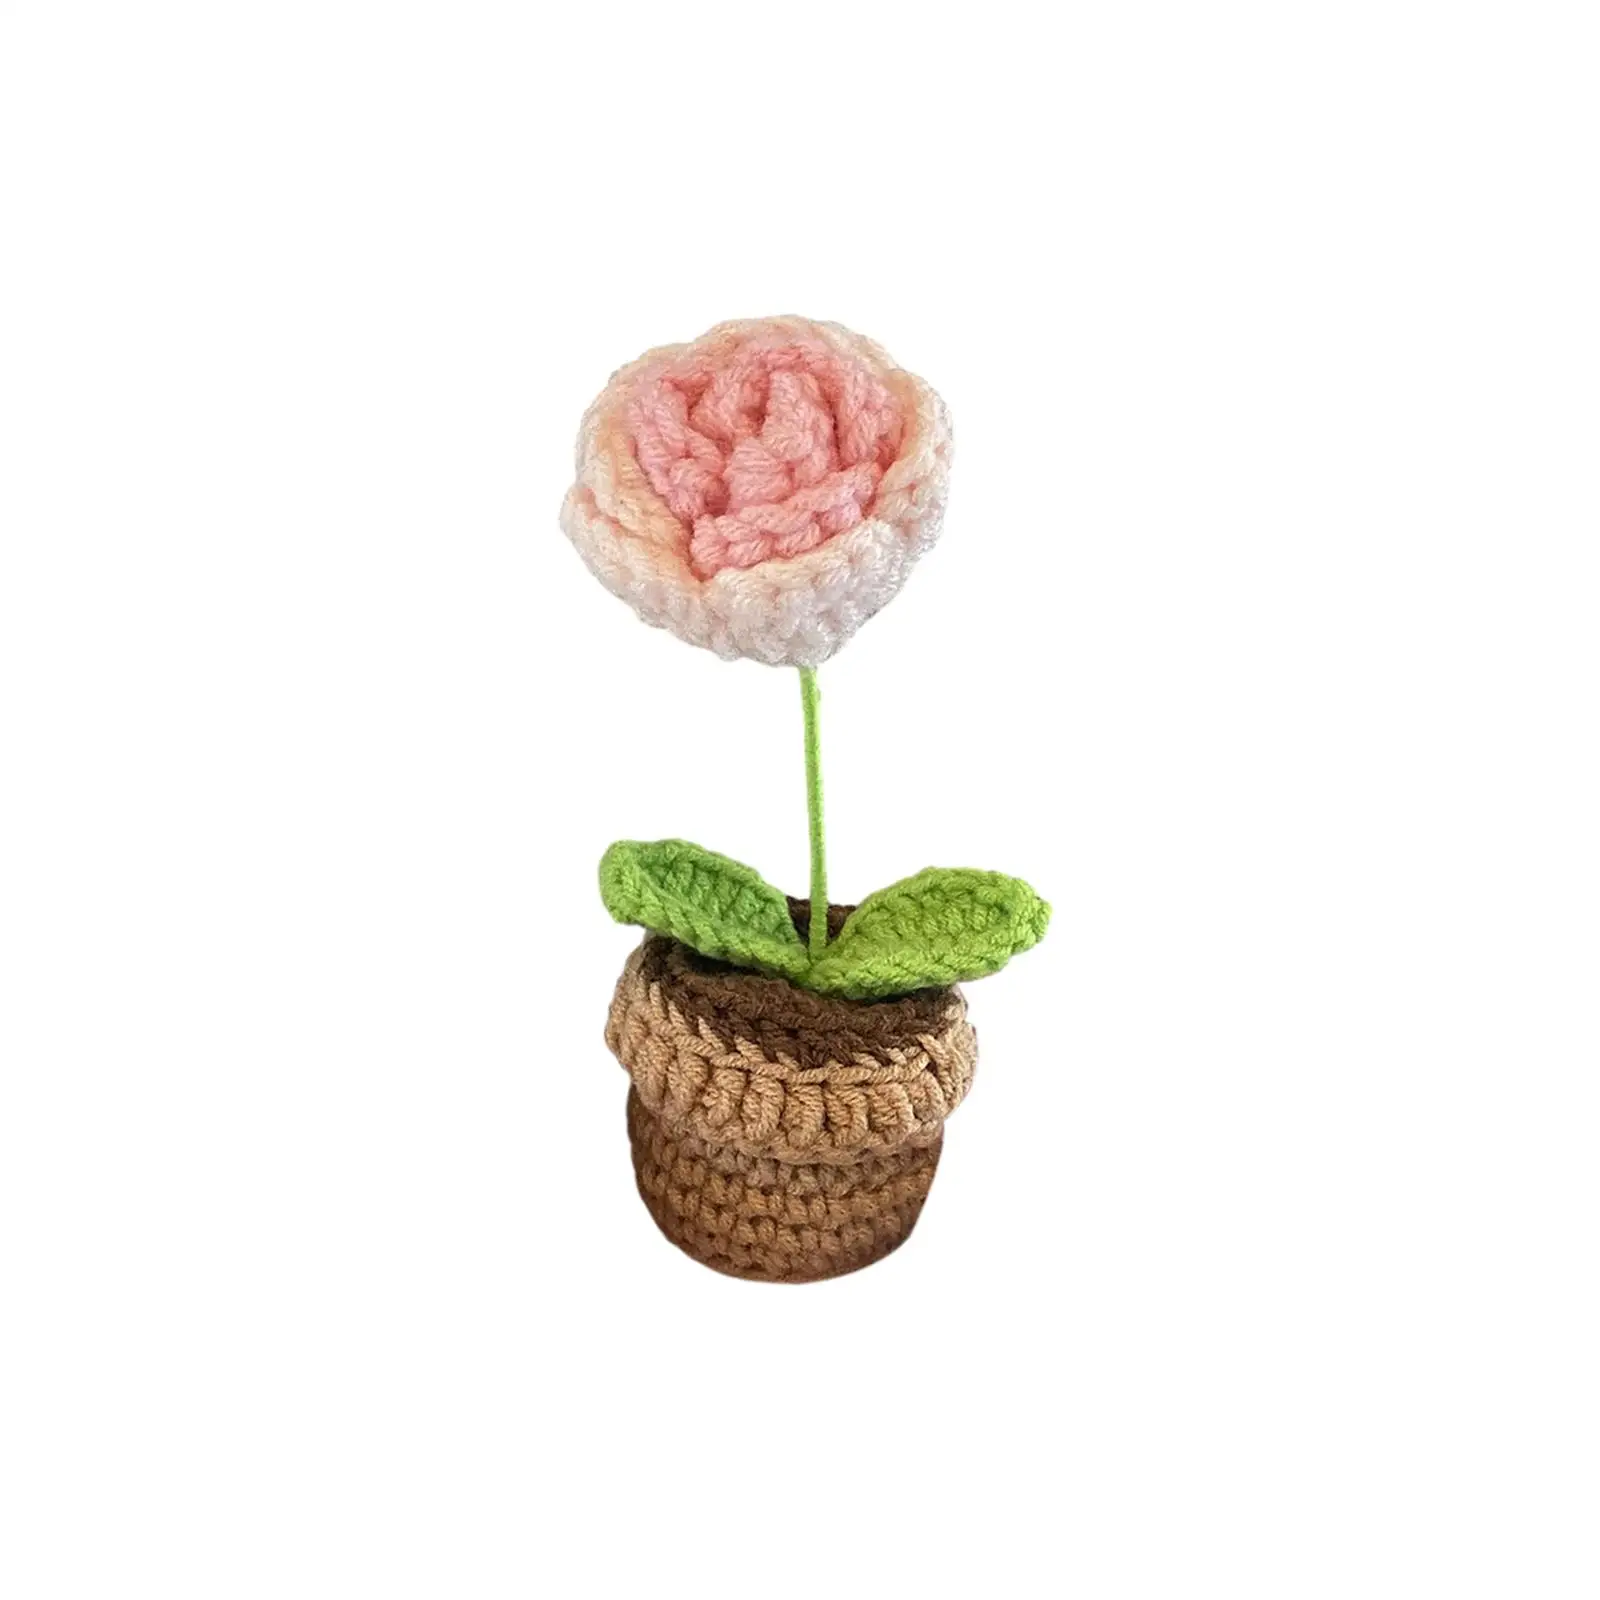 Knitting Crochet Flower Bouquet Handmade Knitted Small Potted Plants for Office Bathroom Shelf Desk Ornaments Gifts